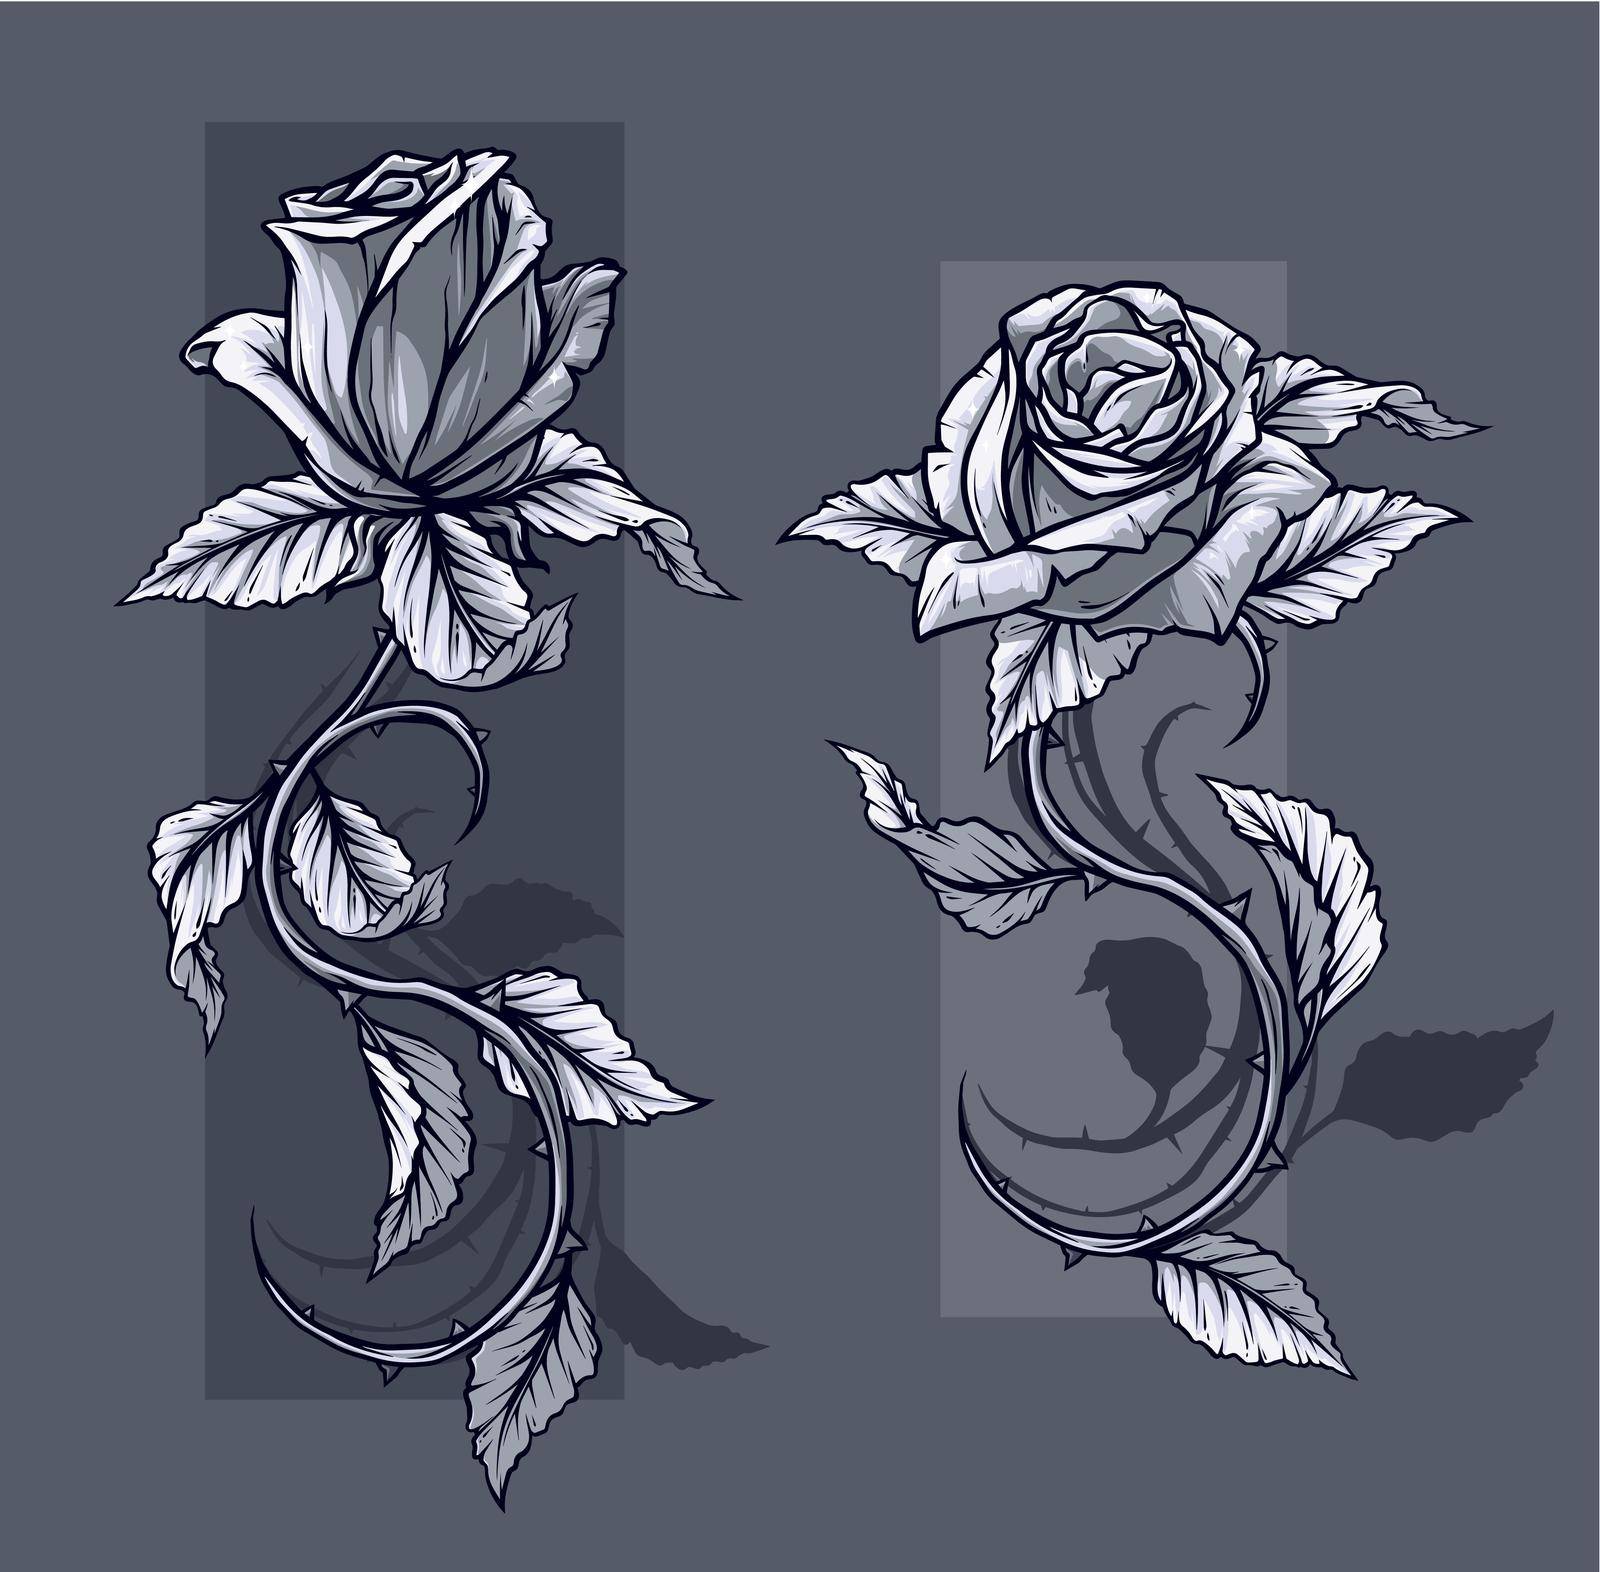 Graphic detailed graphic black and white roses flower with stem and leaves. On gray background. Vector icon set. Vol. 2